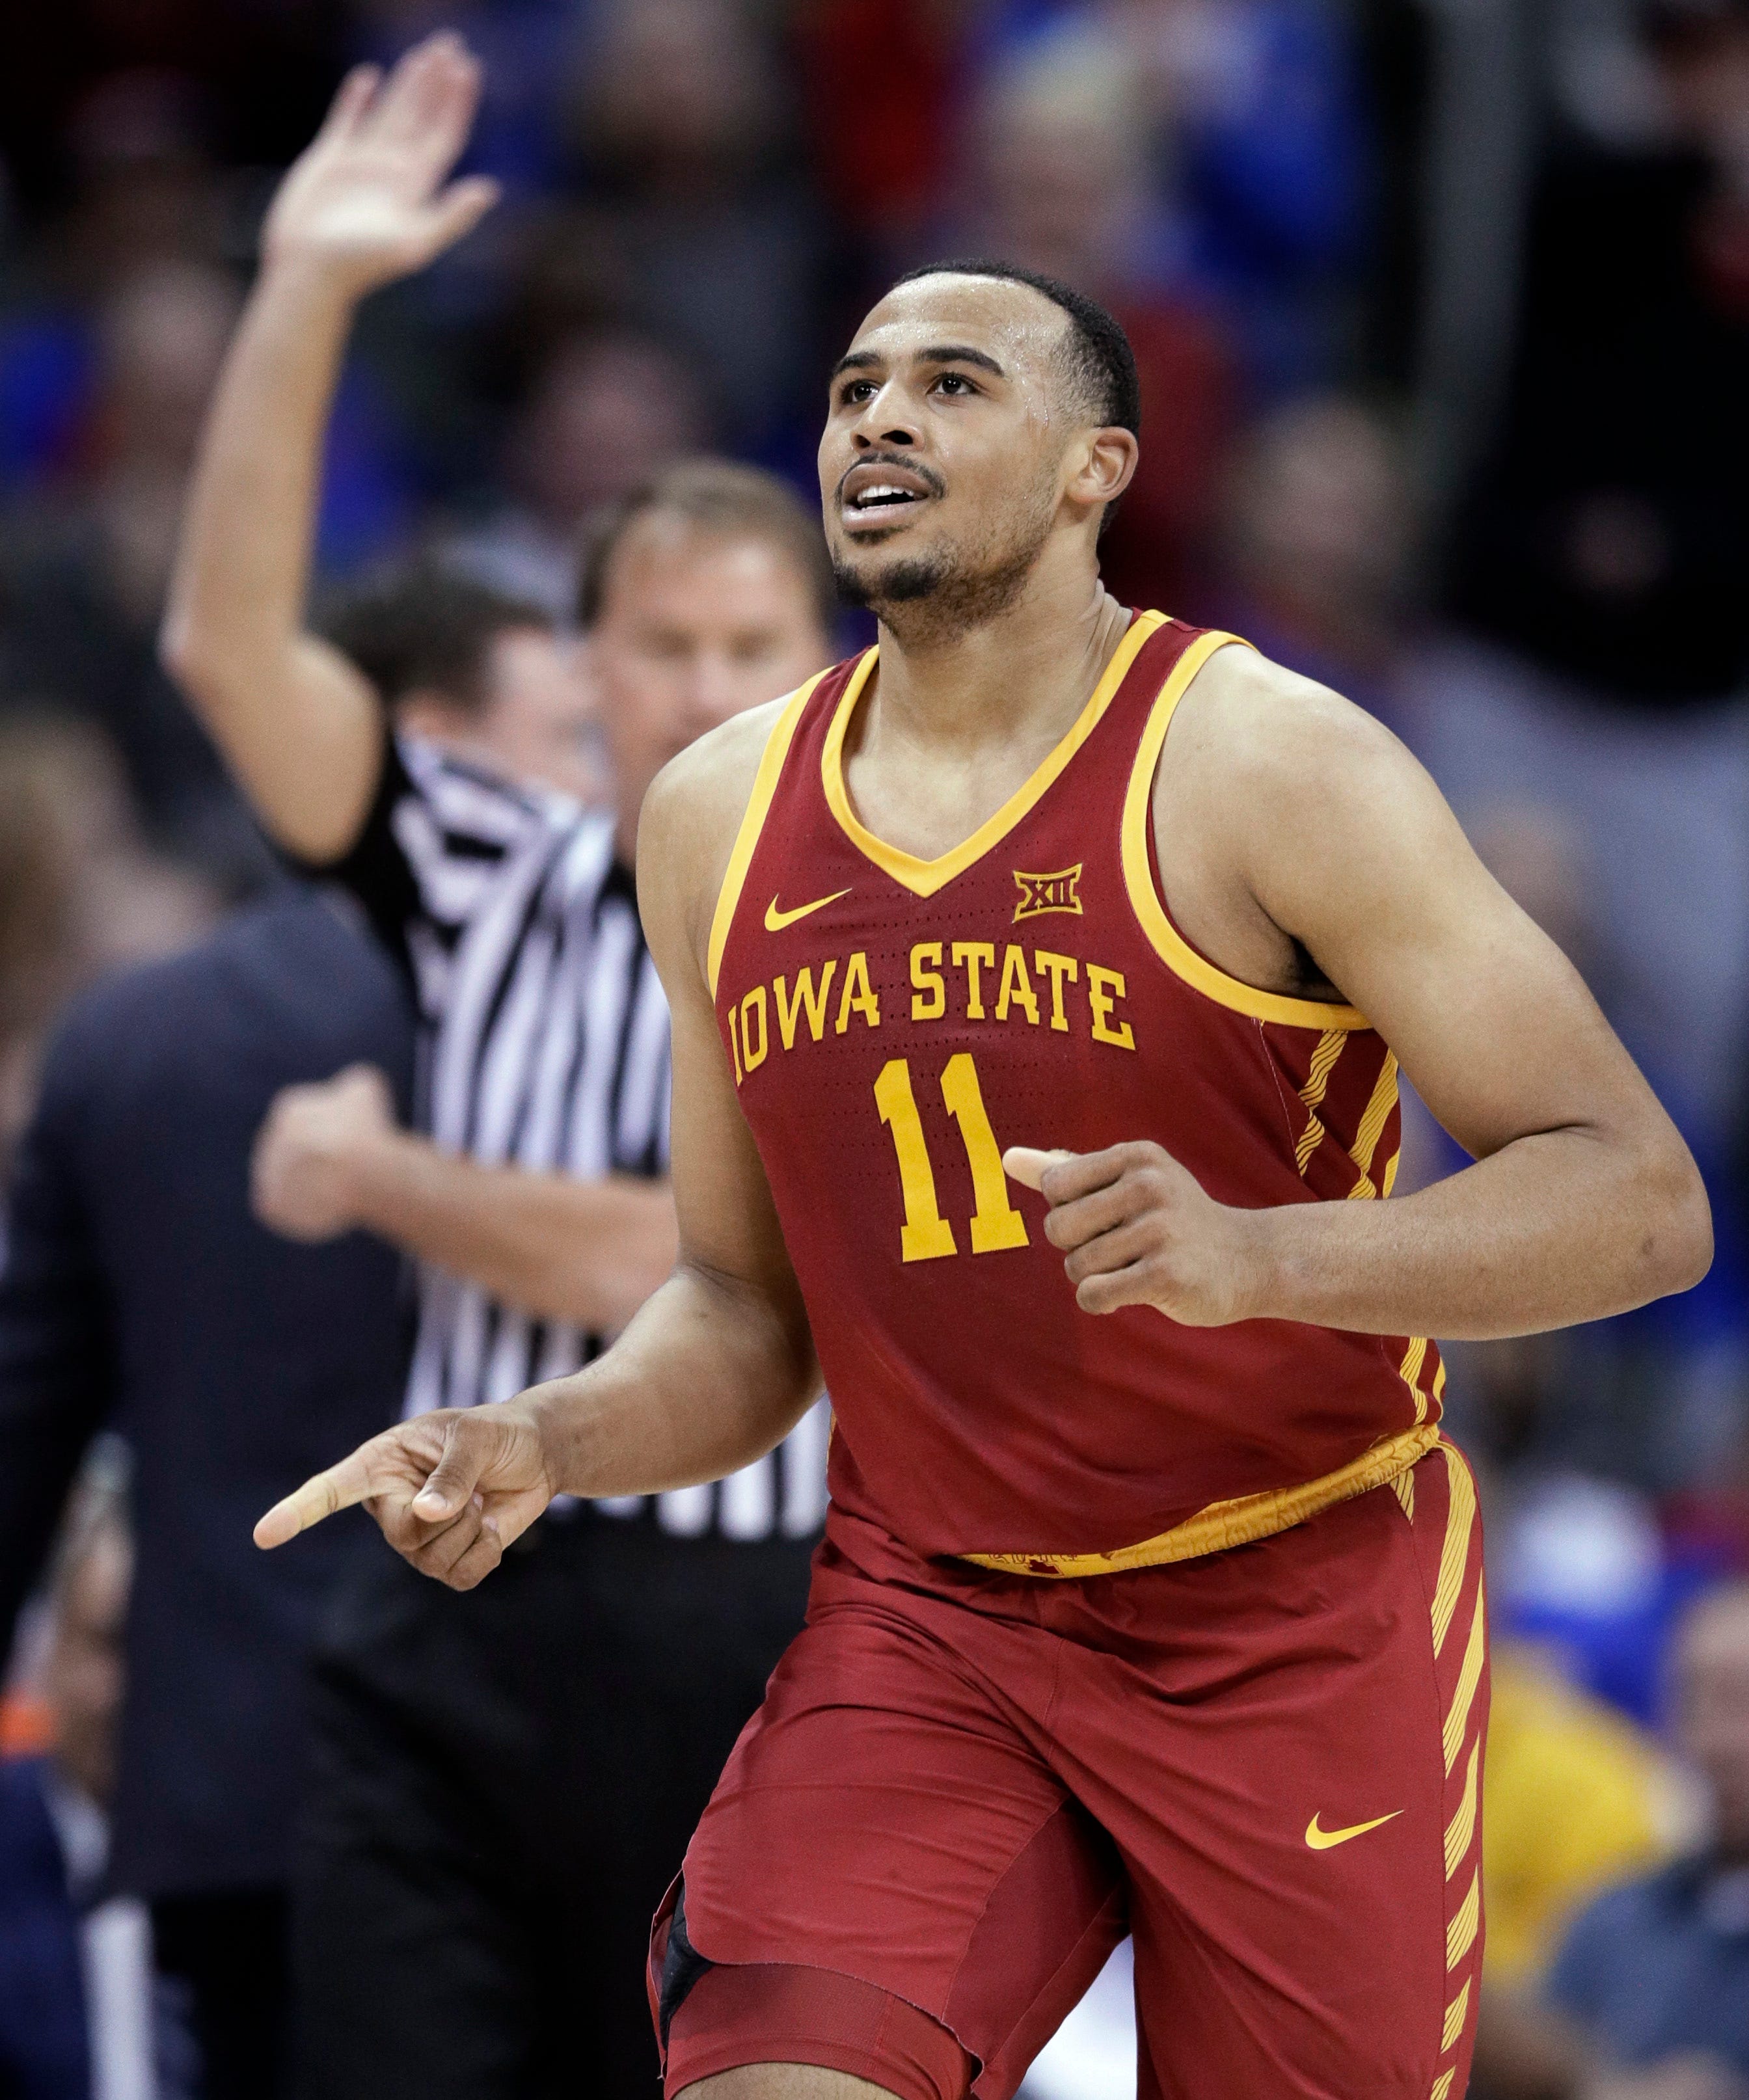 19. San Antonio Spurs: Talen Horton-Tucker, guard, Iowa State. He didn’t have eye-popping numbers at Iowa State in his freshman year but he could be another piece to the Bulls’ talent collection. He shot just 31 percent on 3-pointers last season, but with more playing time, he could develop nicely.